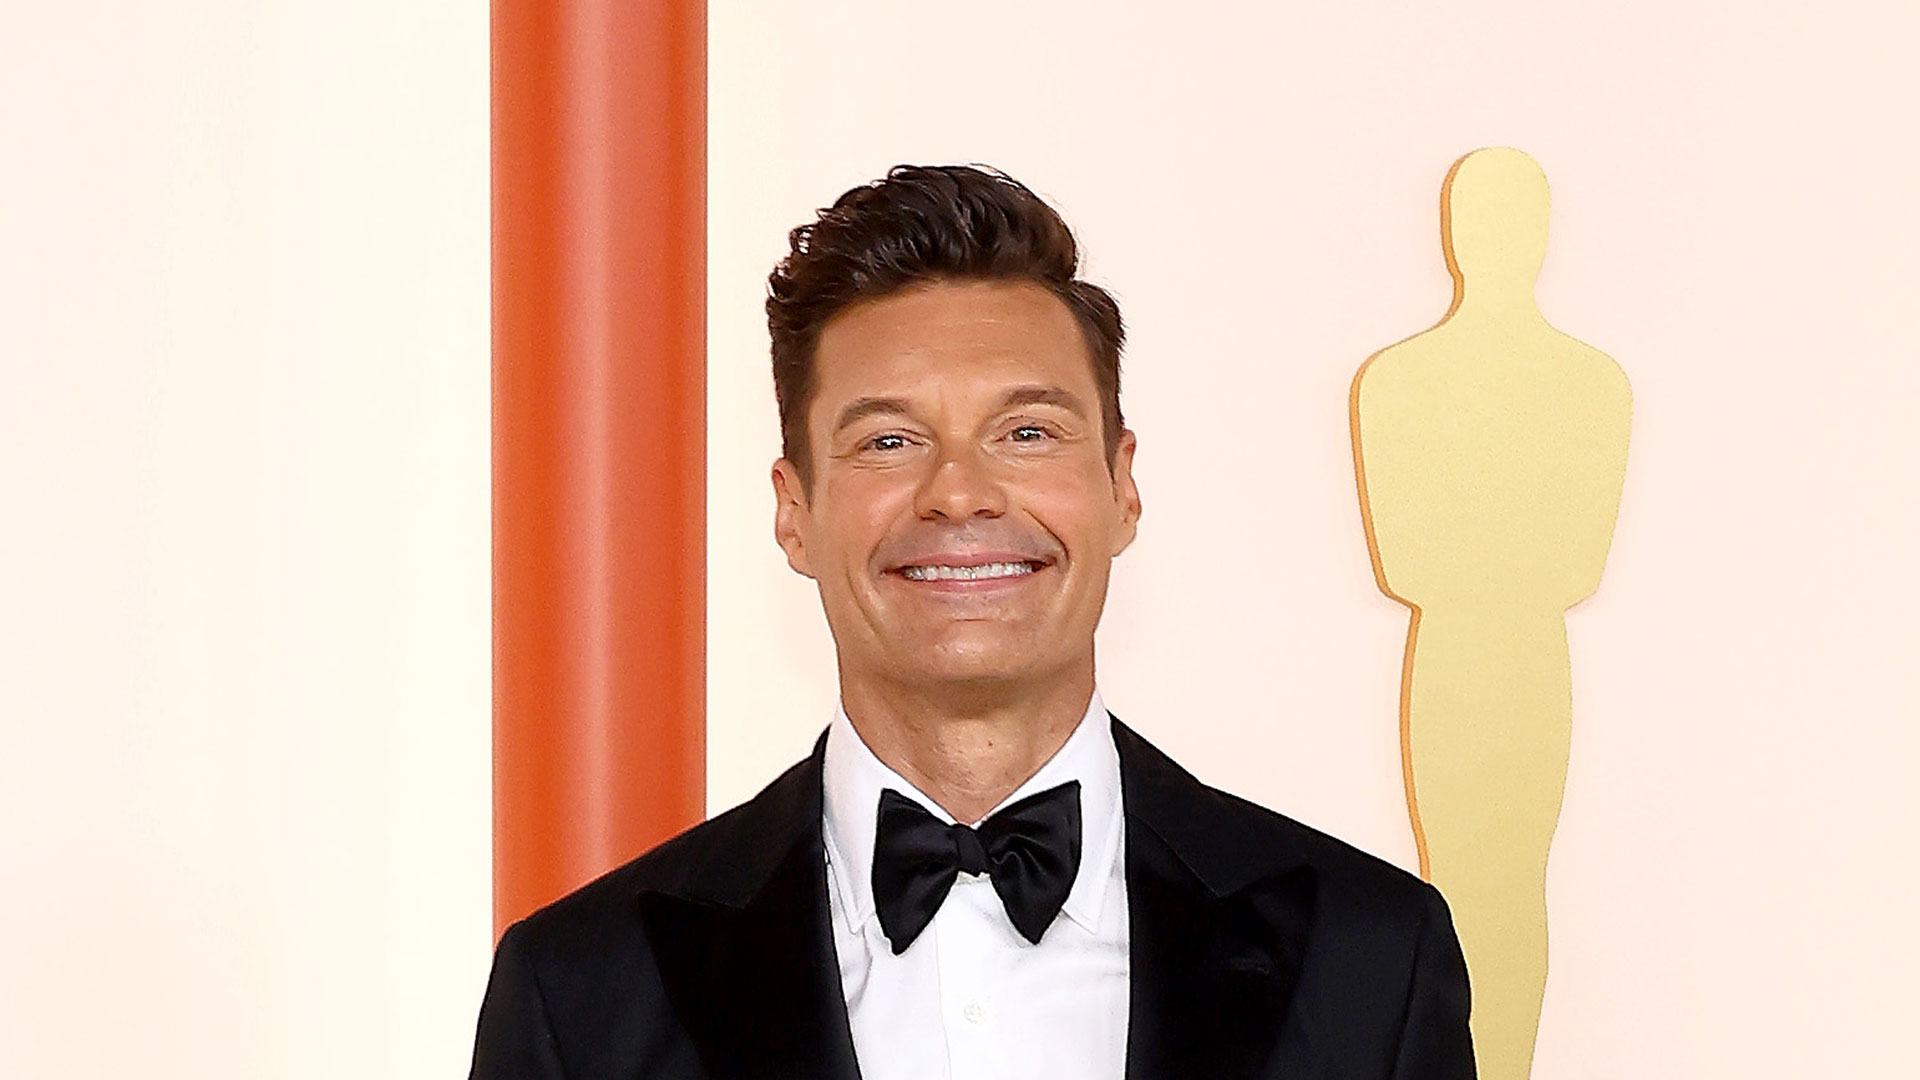 Ryan Seacrest stated that he was’ready and willing to watch Live talk as a fan’ when he passed hosting to Mark Consuelos.